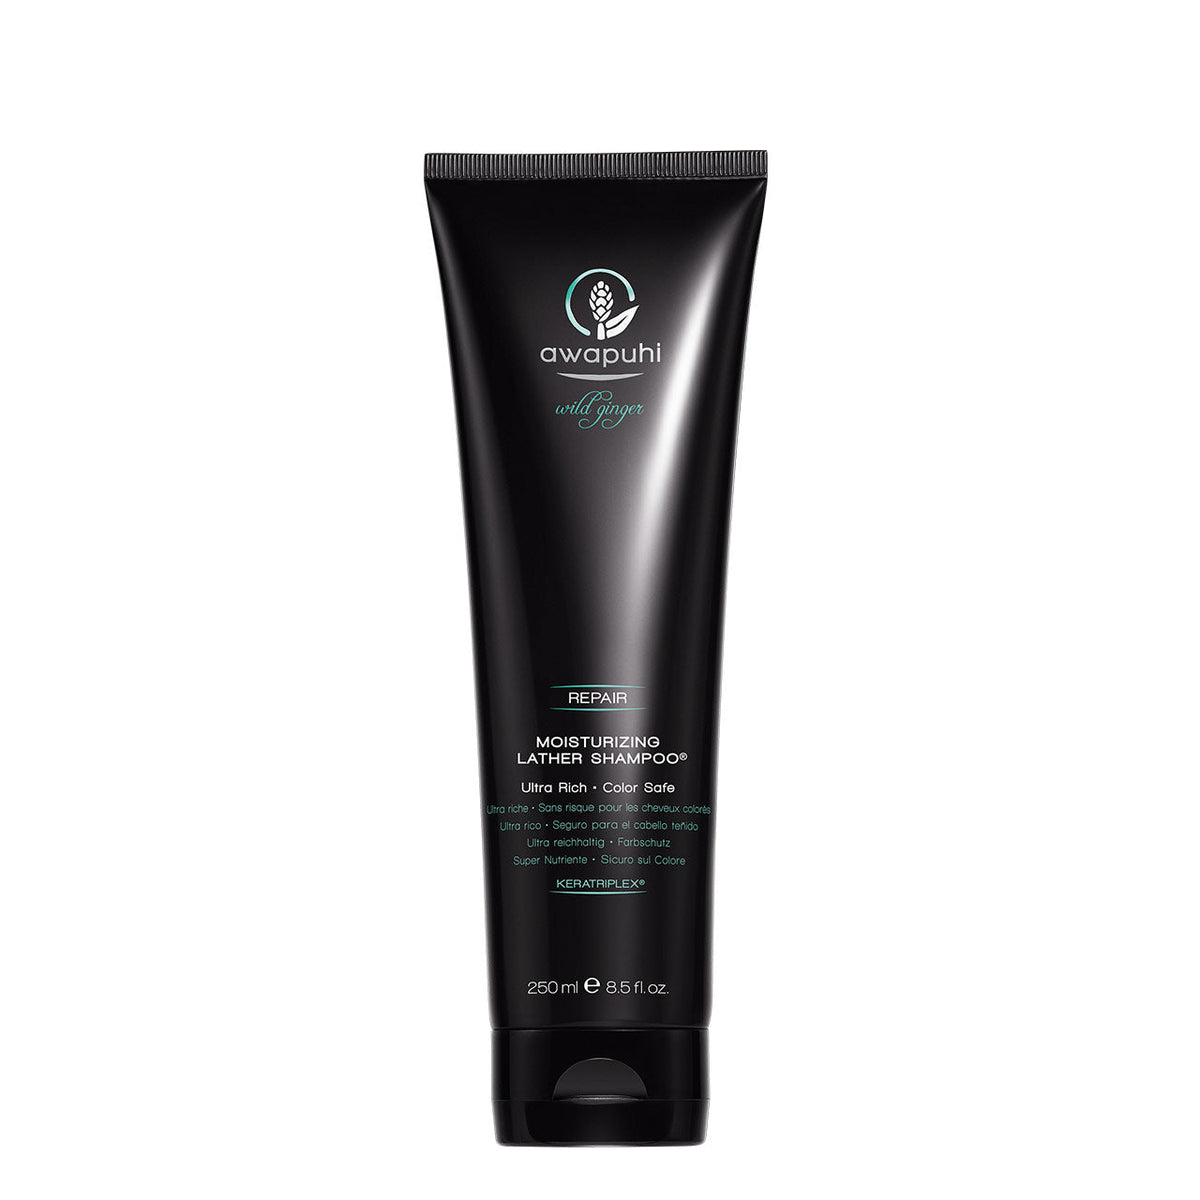 Awapuhi Wild Ginger Repair Moisturizing Lather Shampoo - 250ML - by Paul Mitchell |ProCare Outlet|